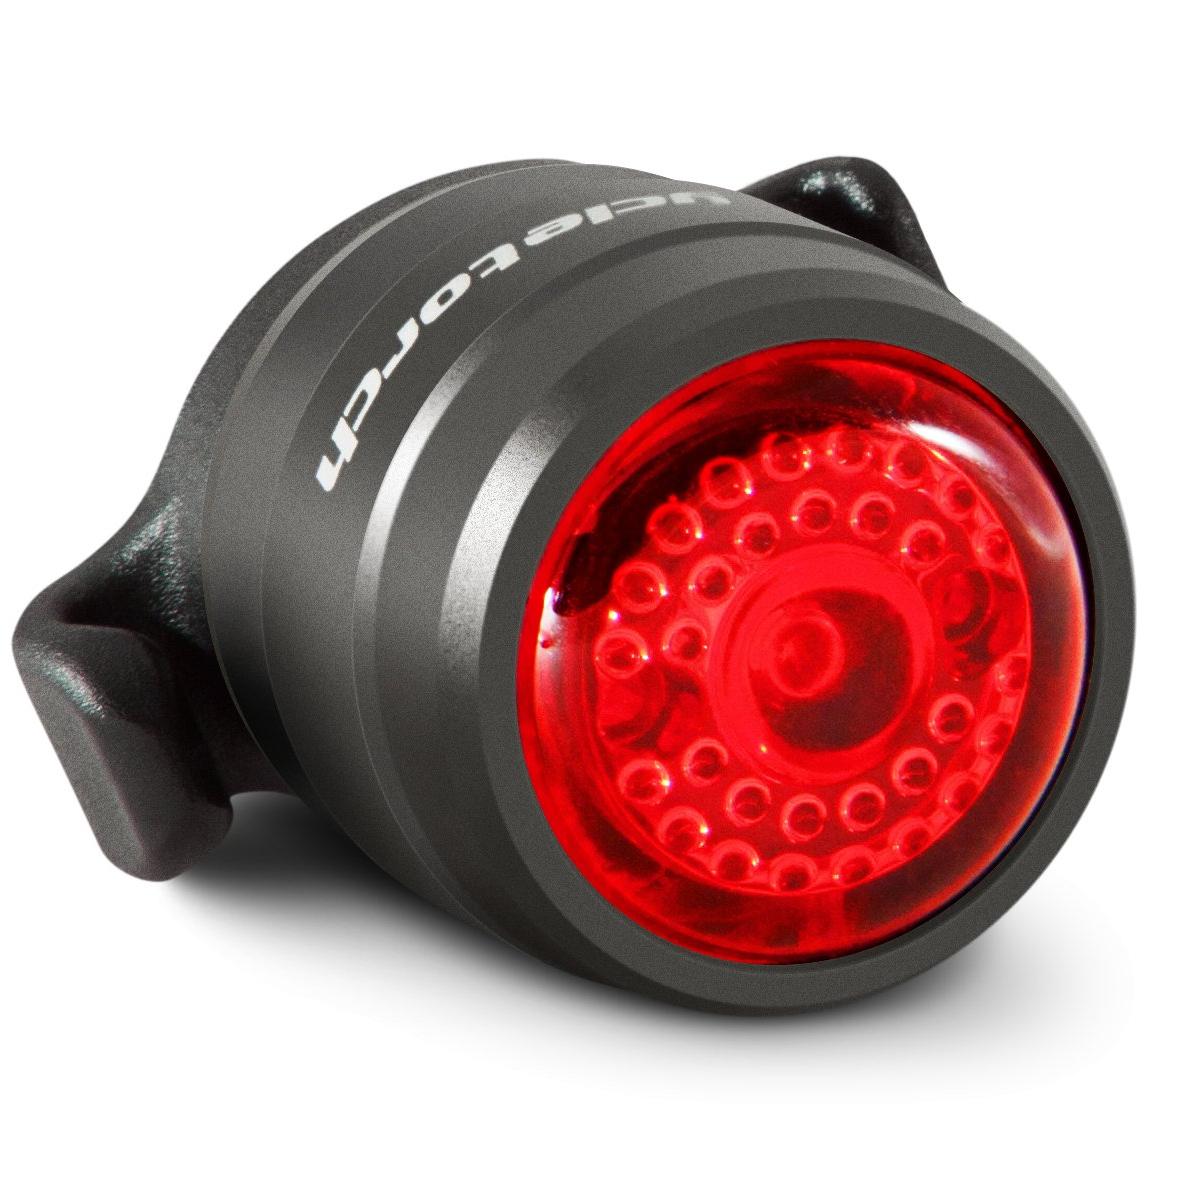 Cycle Torch Light Bolt - USB Rechargeable Bike Tail Light, RED Rear Bicycle Light LED